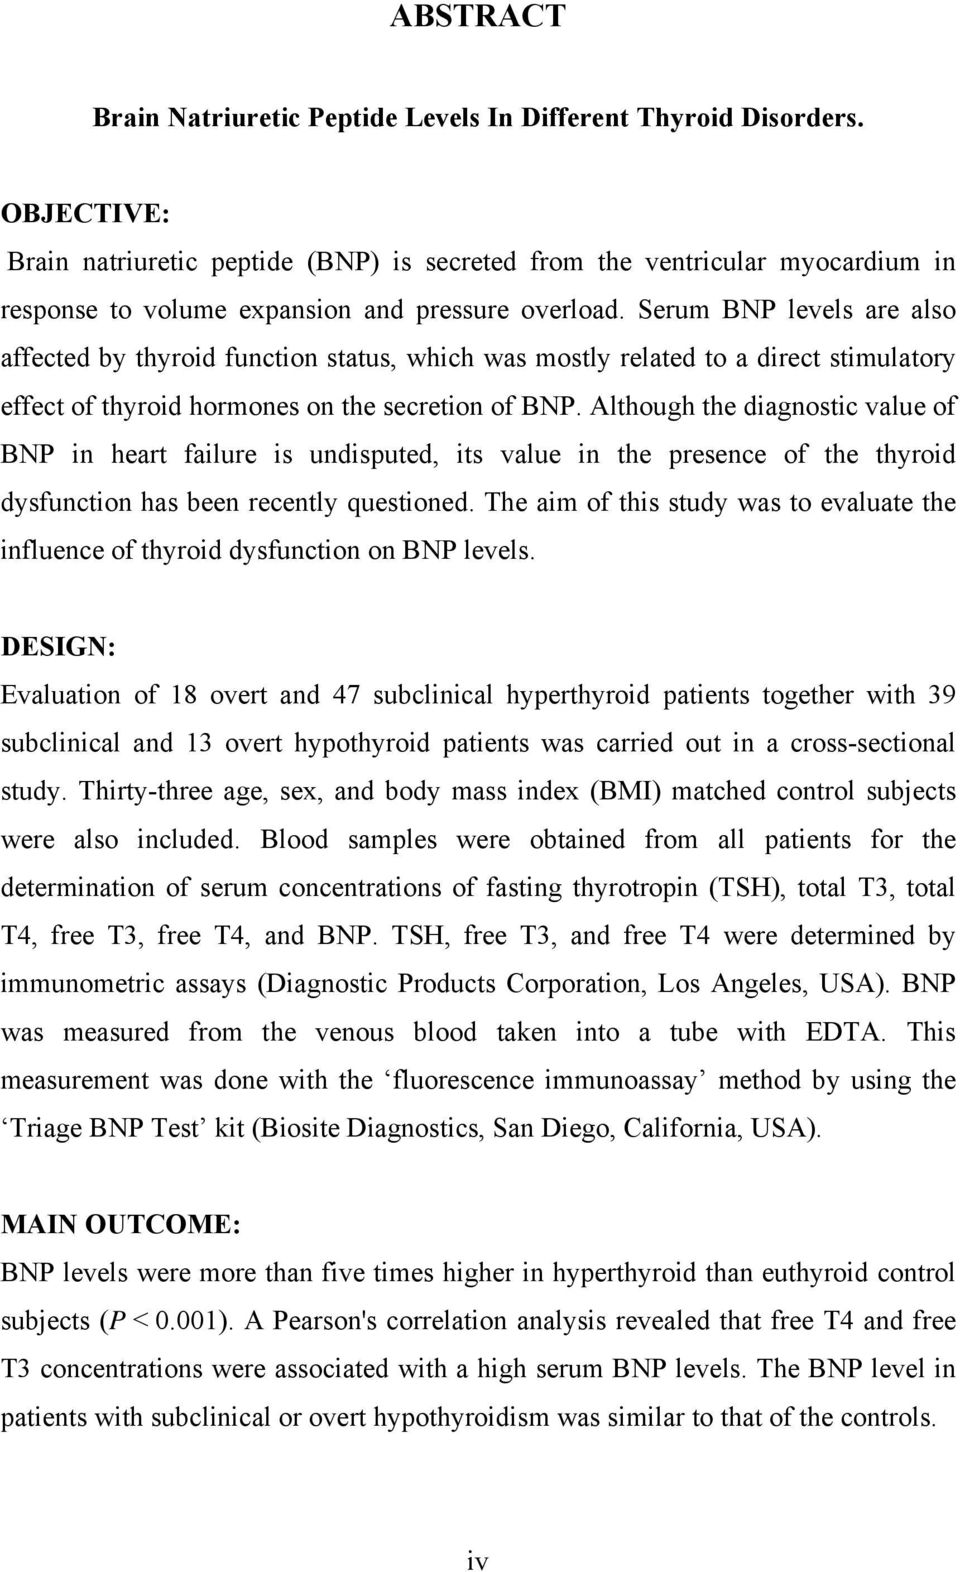 Serum BNP levels are also affected by thyroid function status, which was mostly related to a direct stimulatory effect of thyroid hormones on the secretion of BNP.